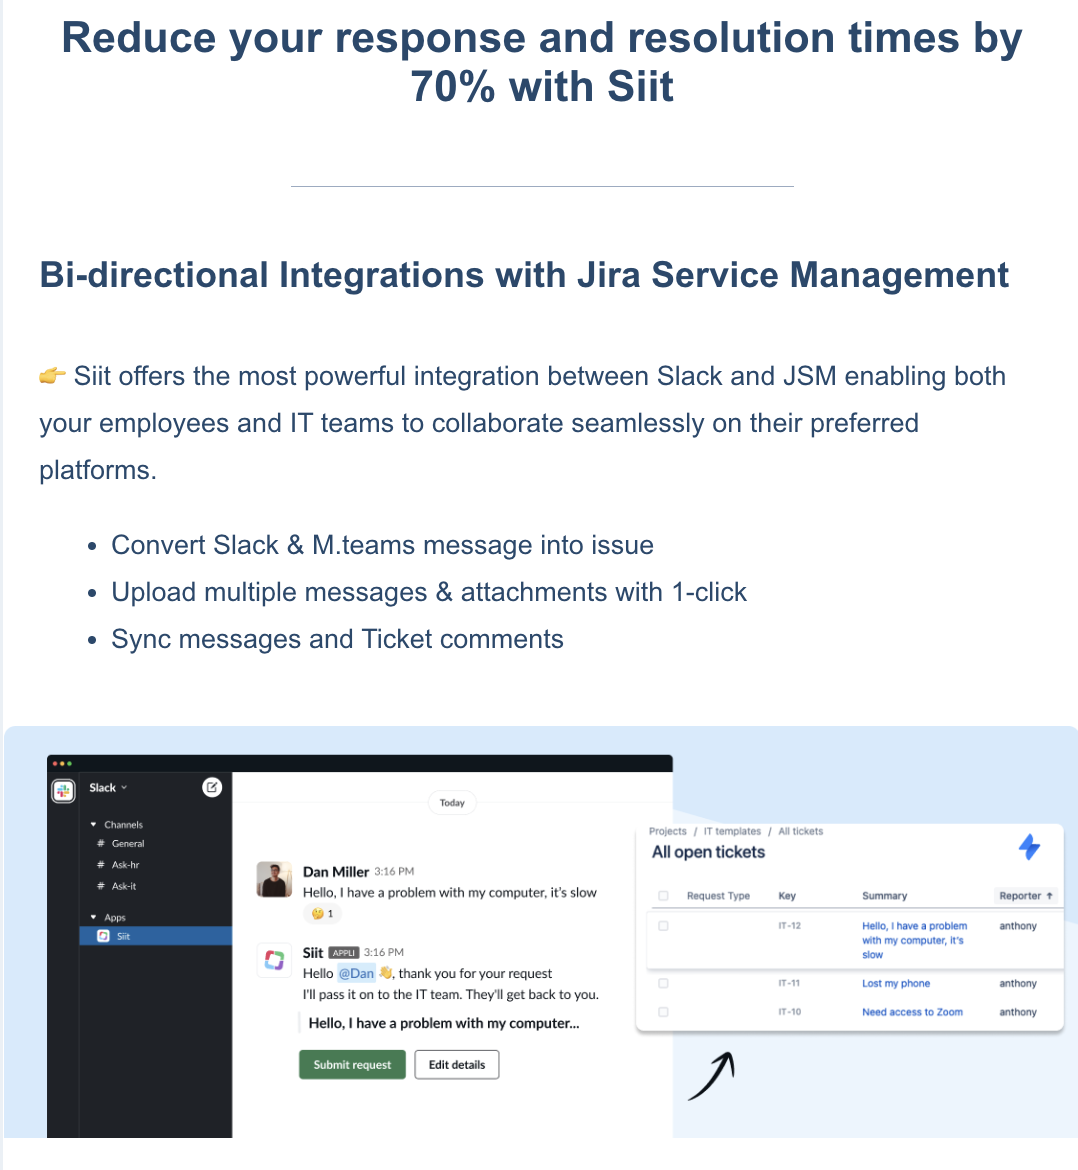 A screenshot of an email from Siit that announces their Jira integration